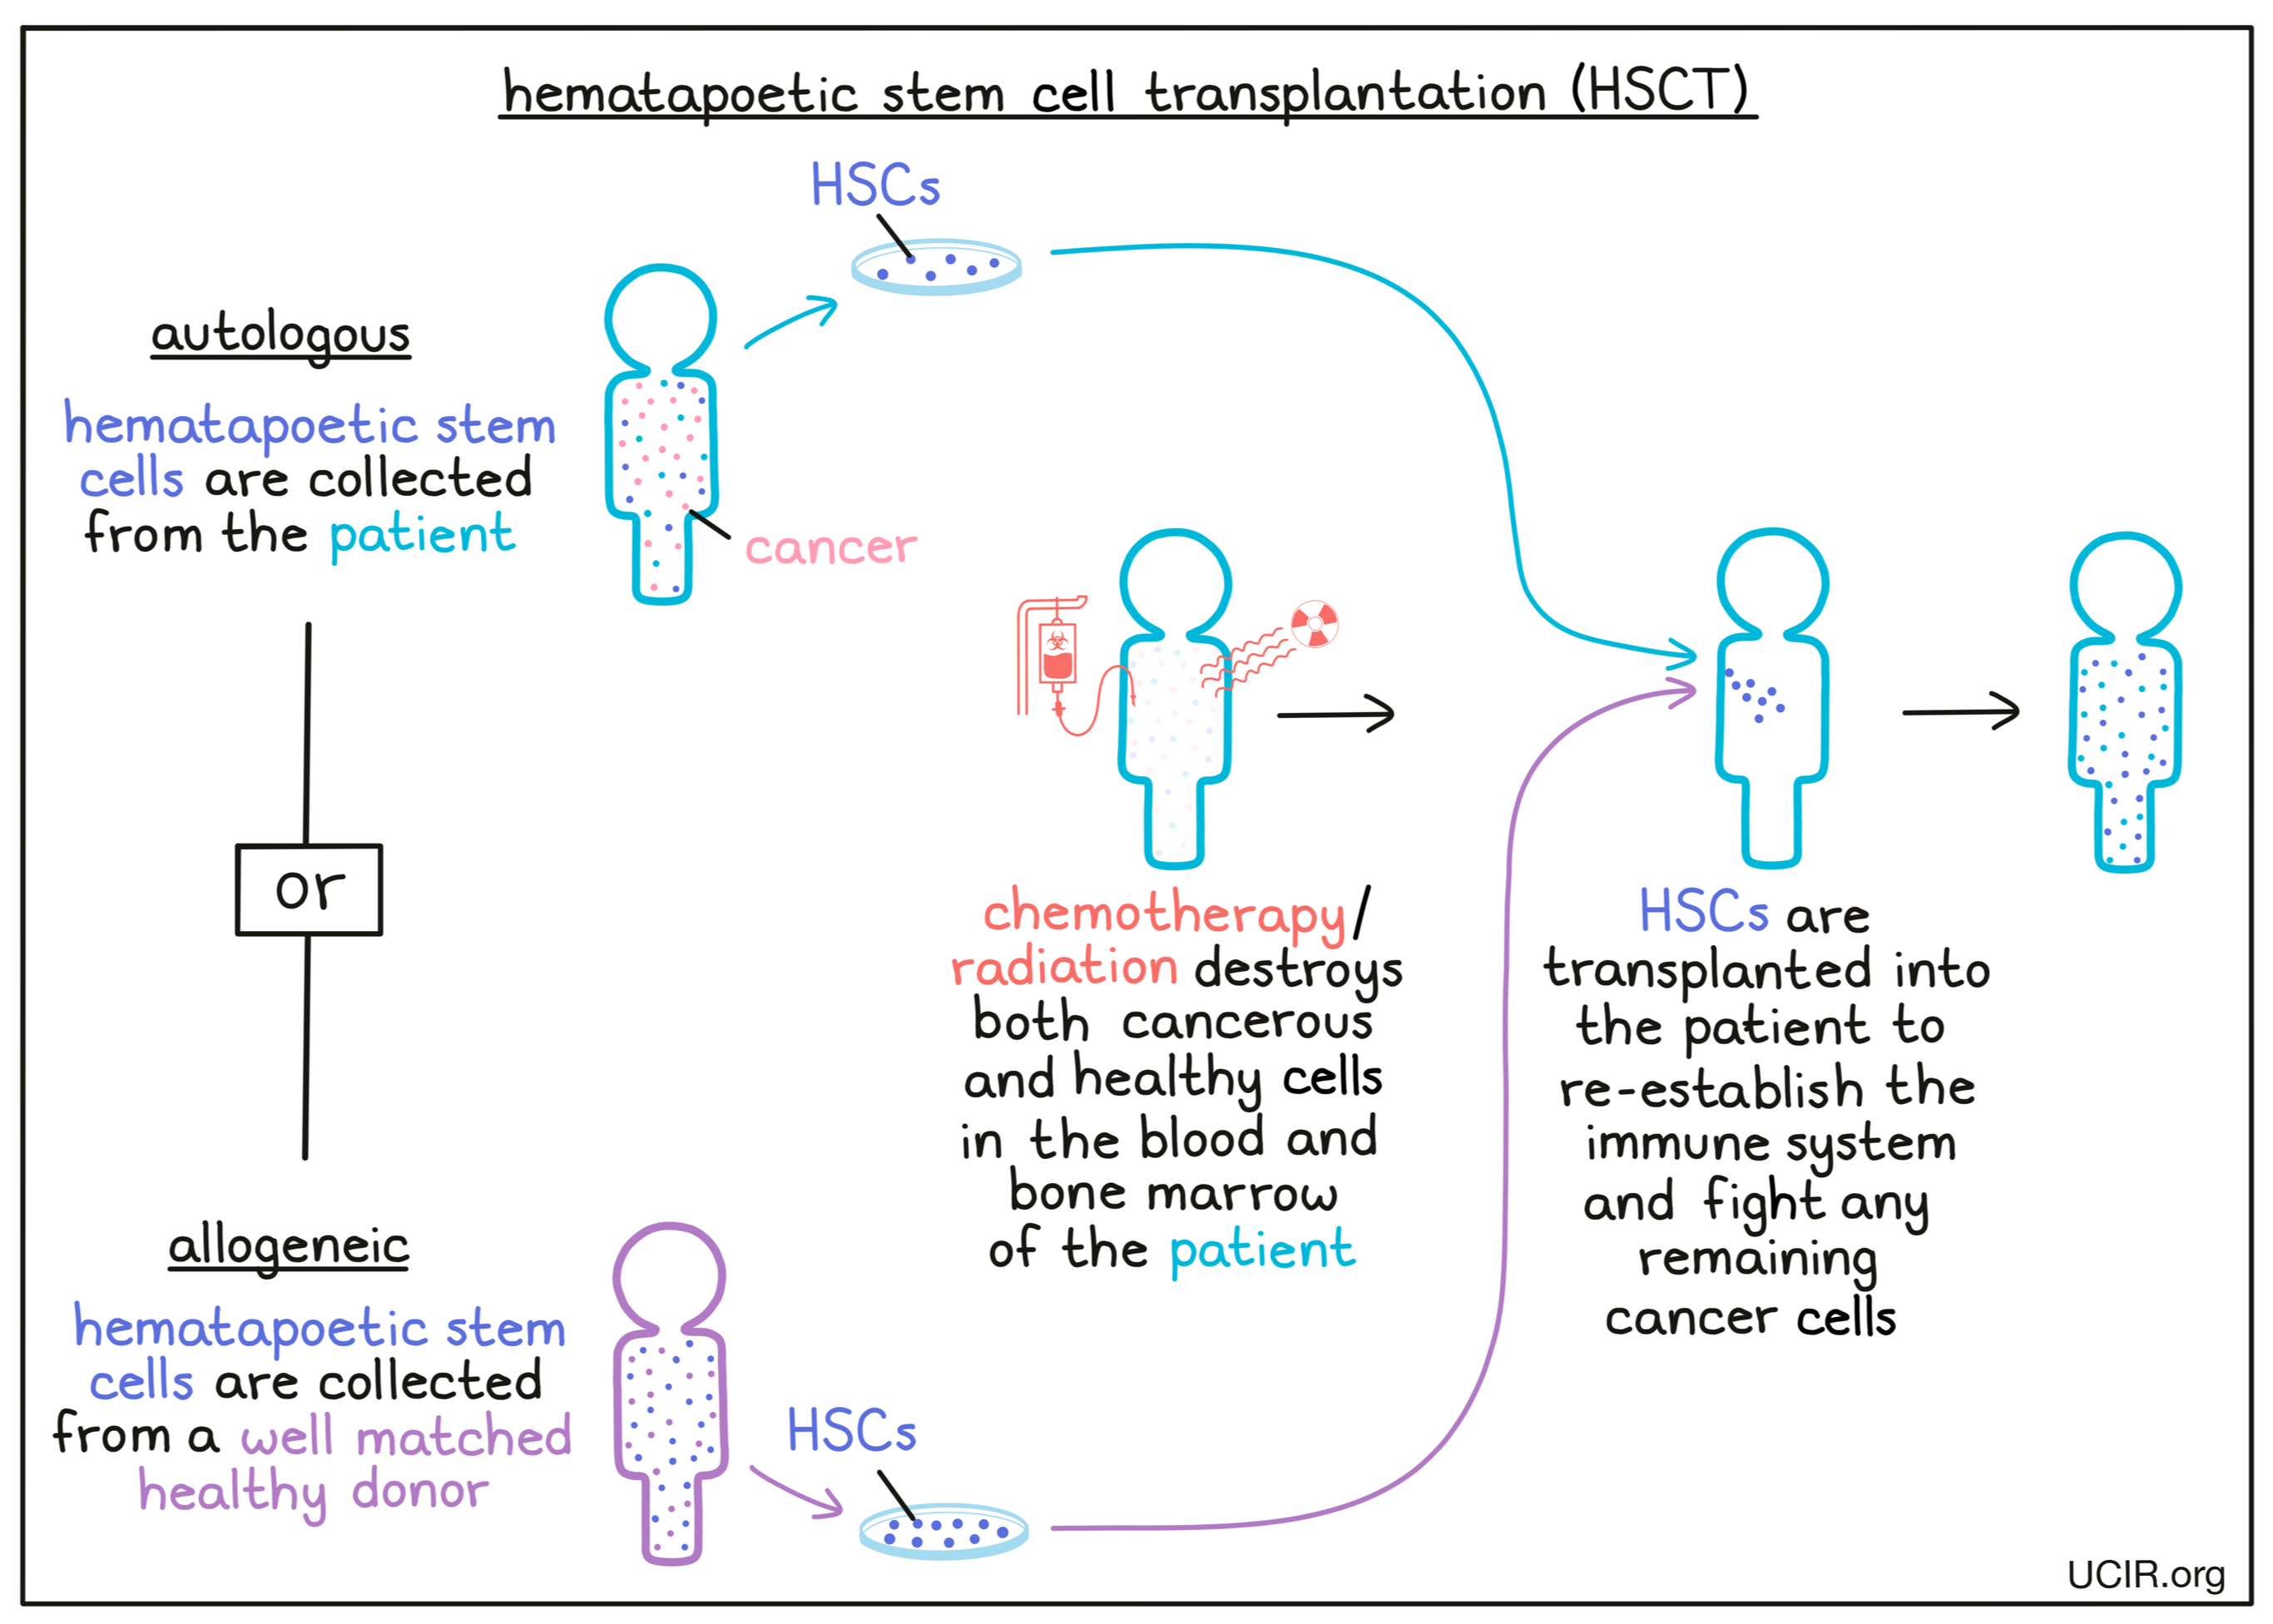 Illustration showing how HSCT works